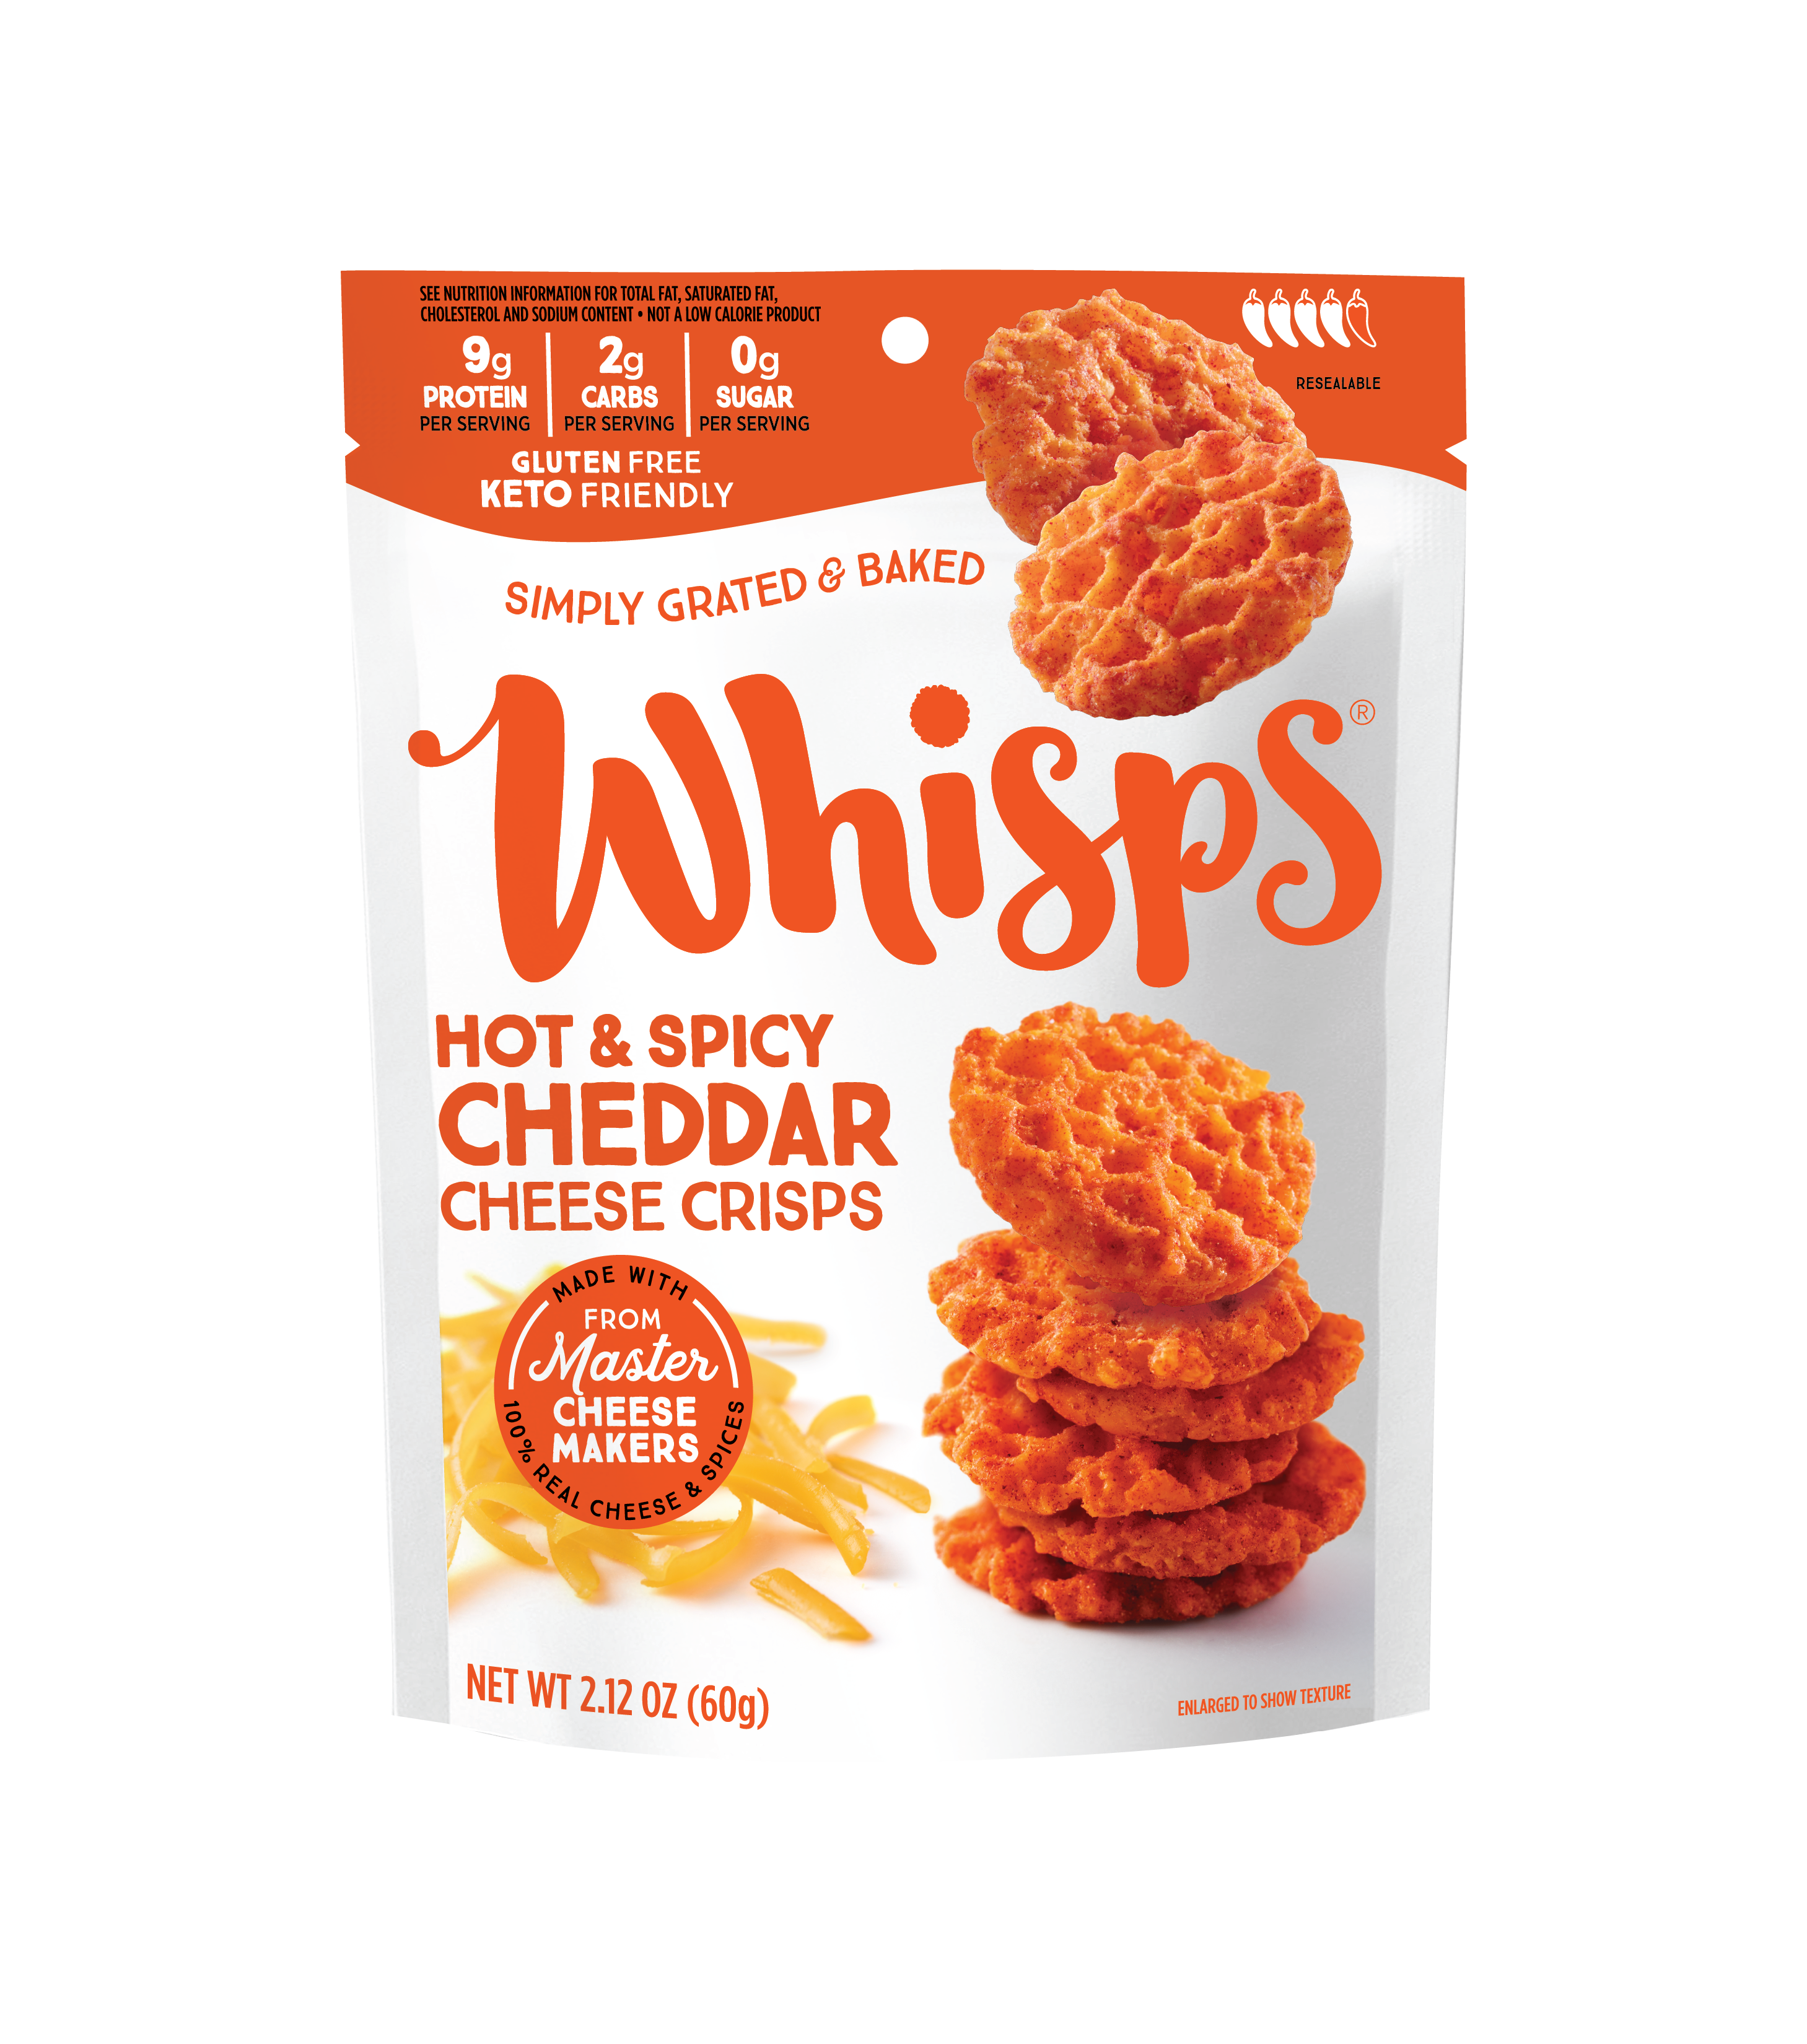 Hot & Spicy Cheddar Cheese Crisps